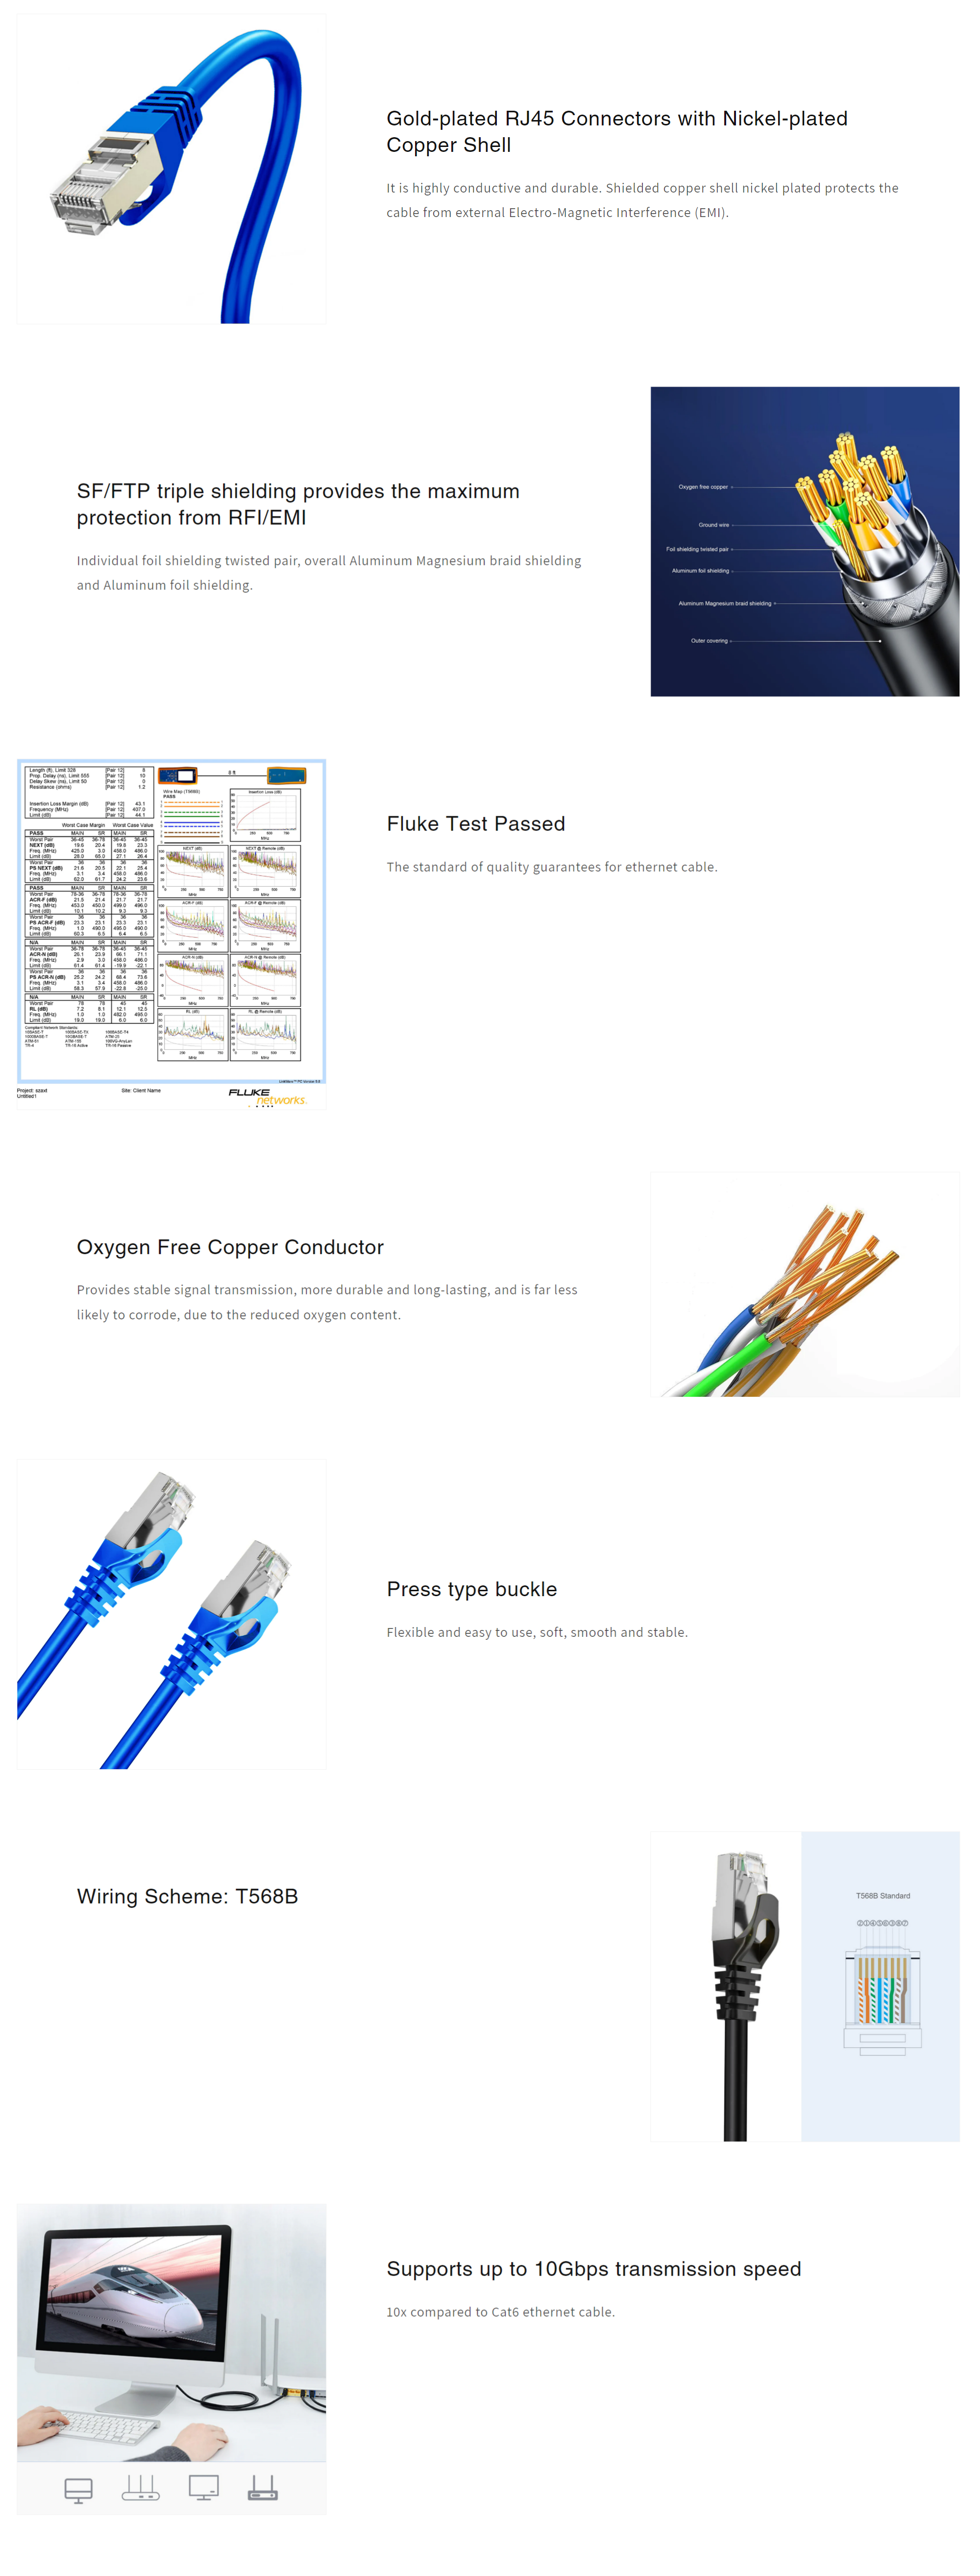 A large marketing image providing additional information about the product Cruxtec Cat7 0.5m 10GbE SF/FTP Triple Shielding Network Cable Blue - Additional alt info not provided